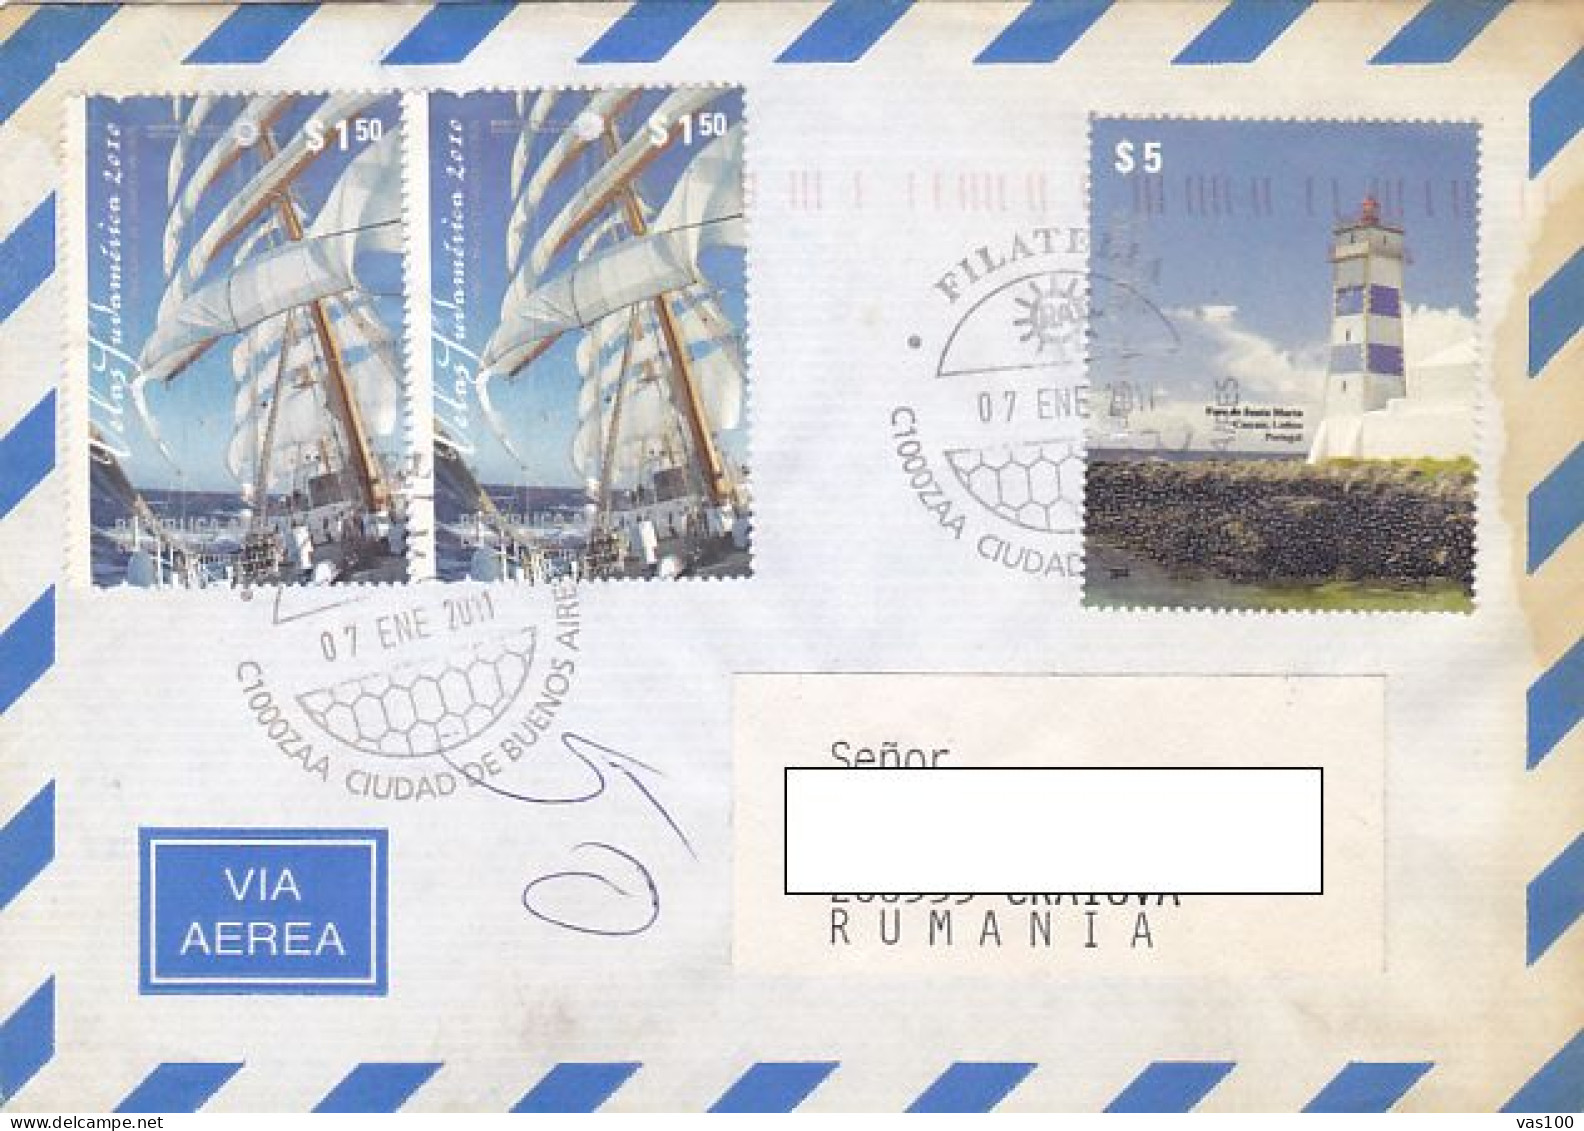 SHIP, SAILING VESSEL, LIGHTHOUSE, STAMPS ON COVER, 2011, ARGENTINA - Covers & Documents